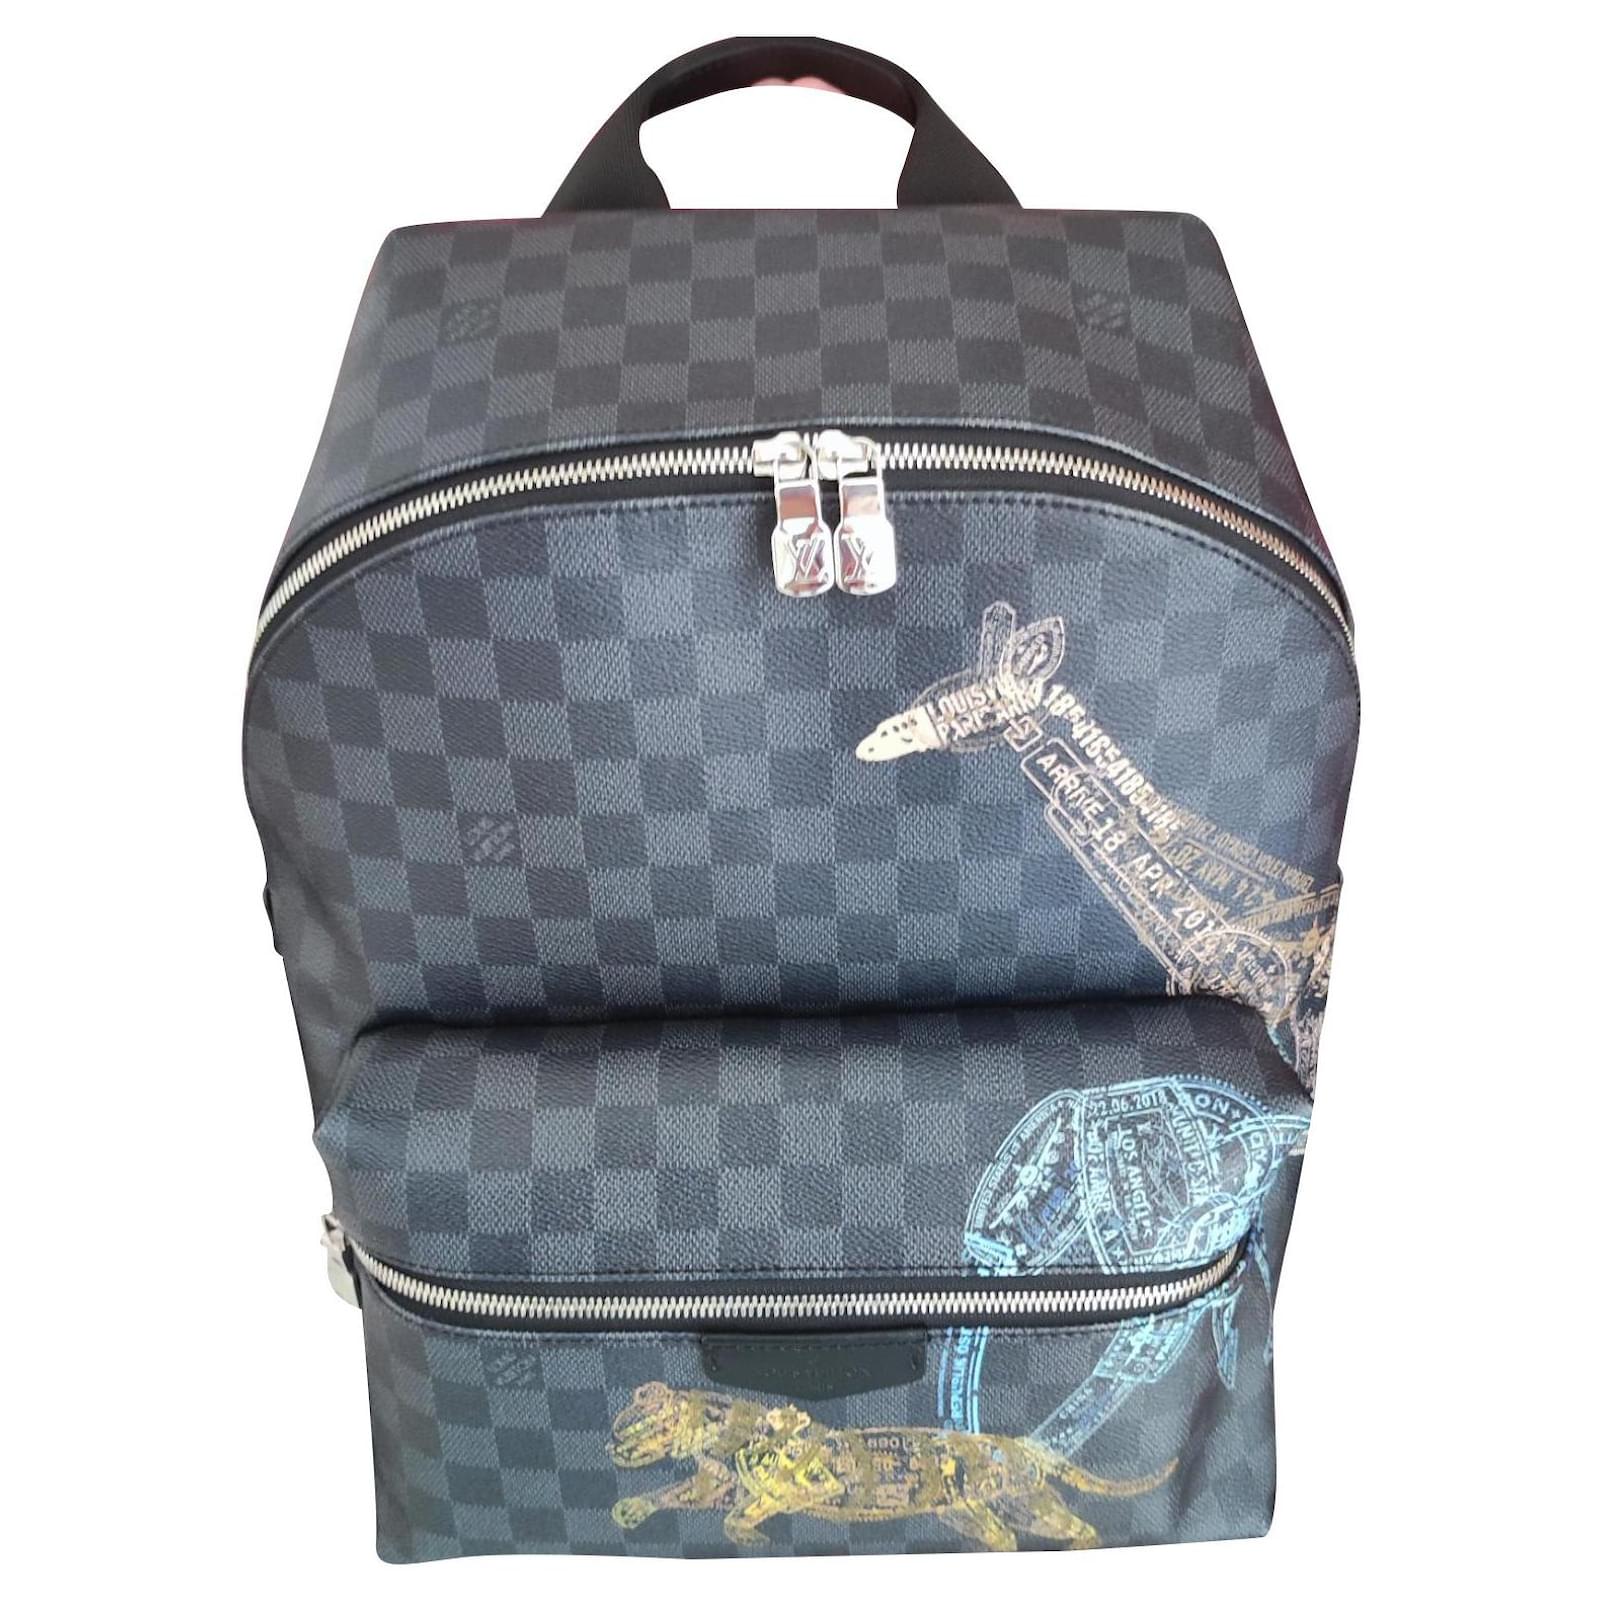 inside of louis vuitton backpack